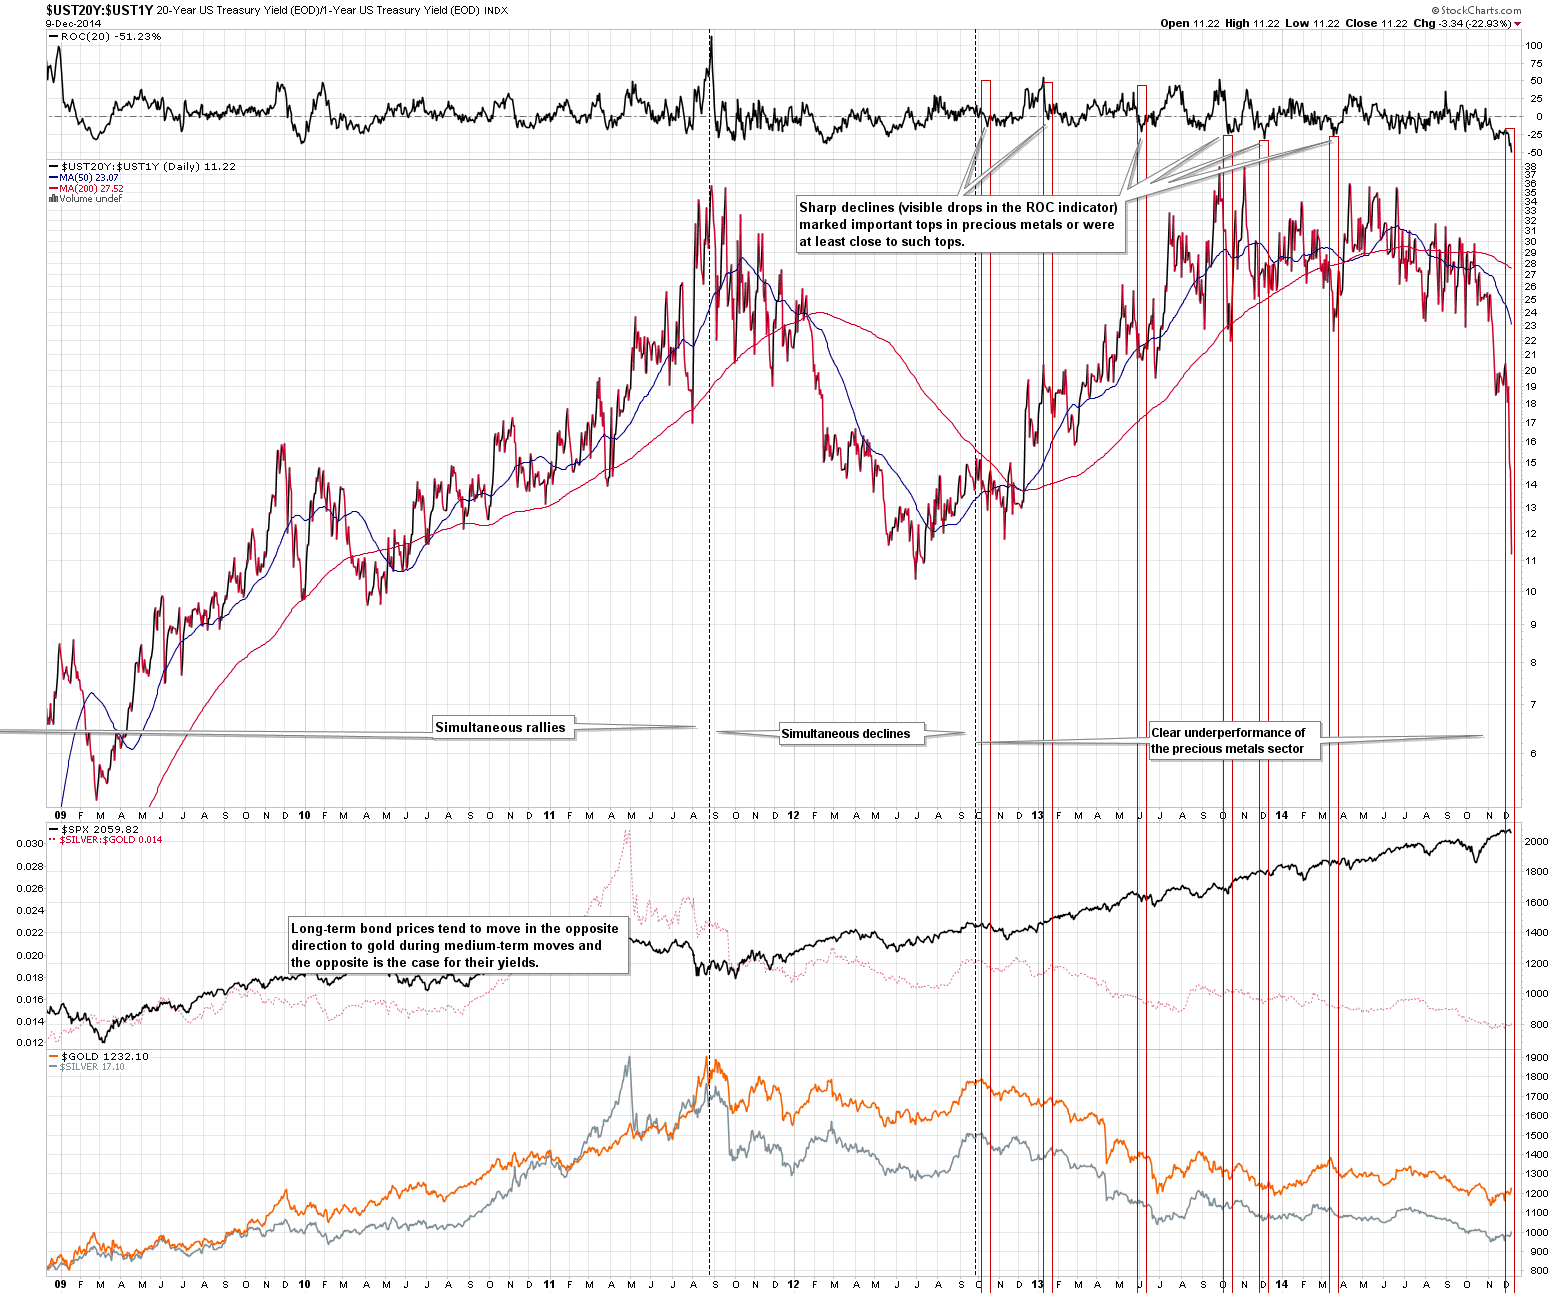 UST20Y:UST1Y - Gold and ratio of US Treasury Yields